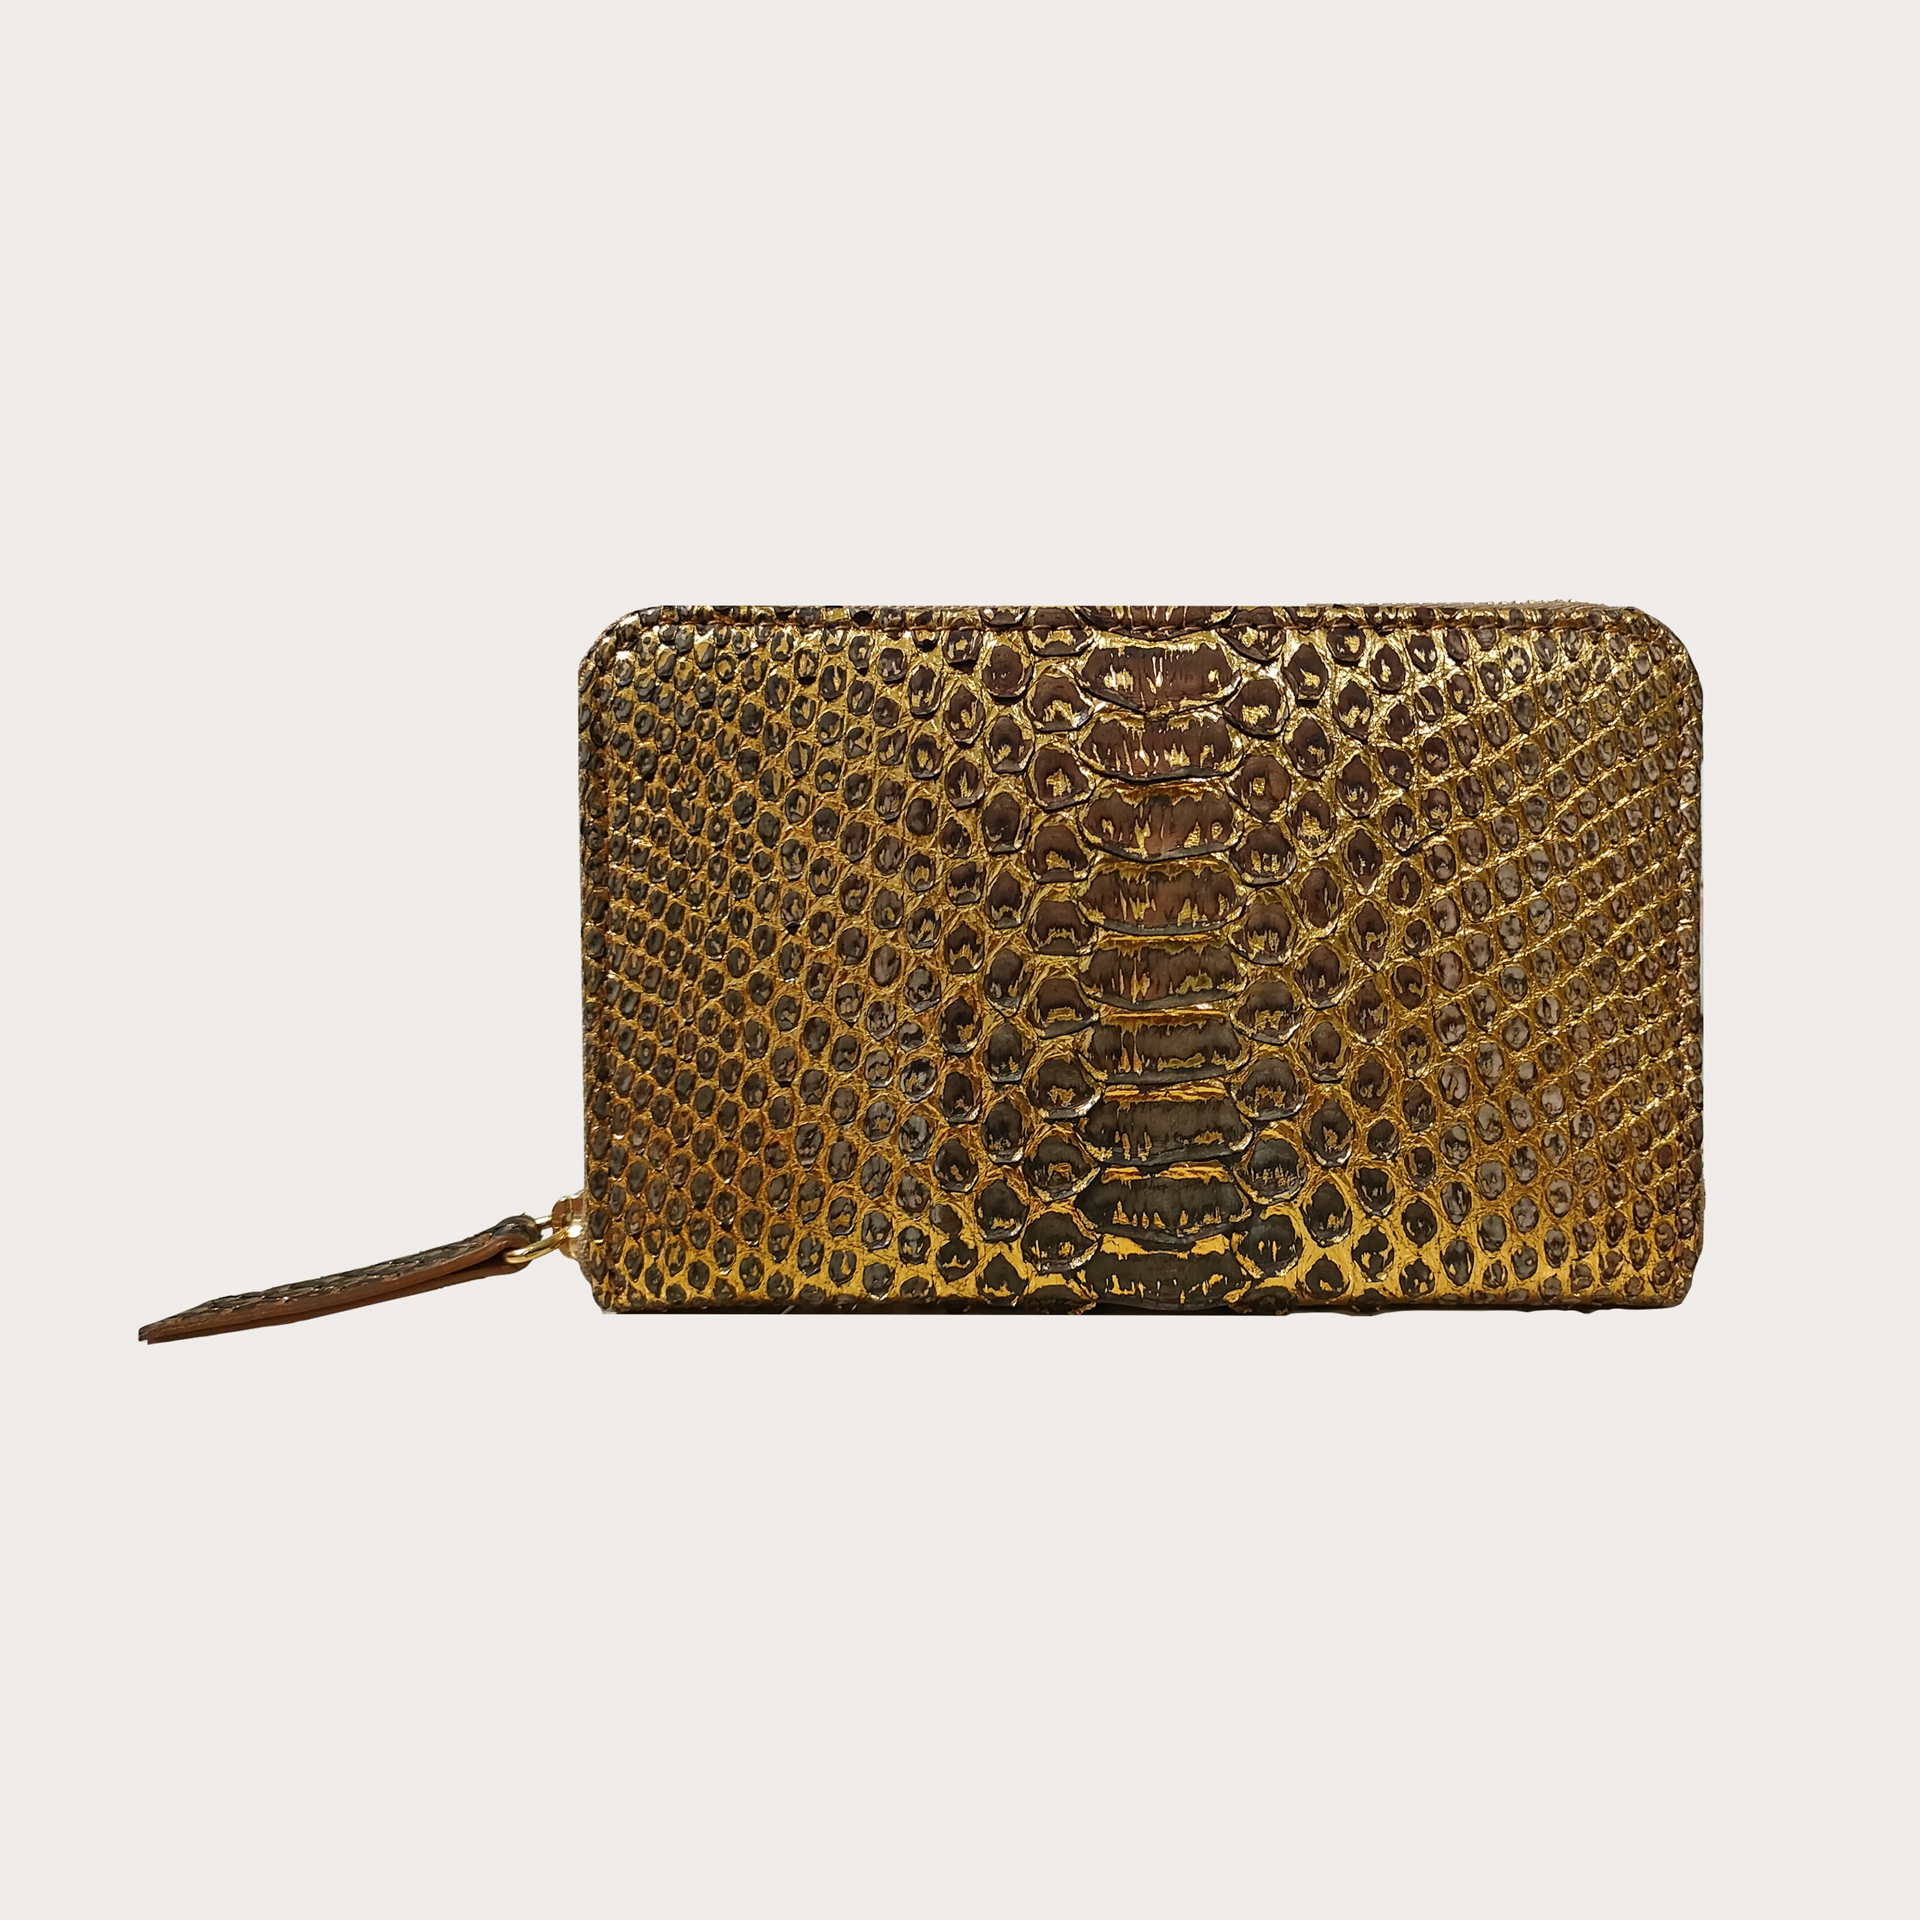 BRUCLE Women's compact wallet in python, hand-painted gold